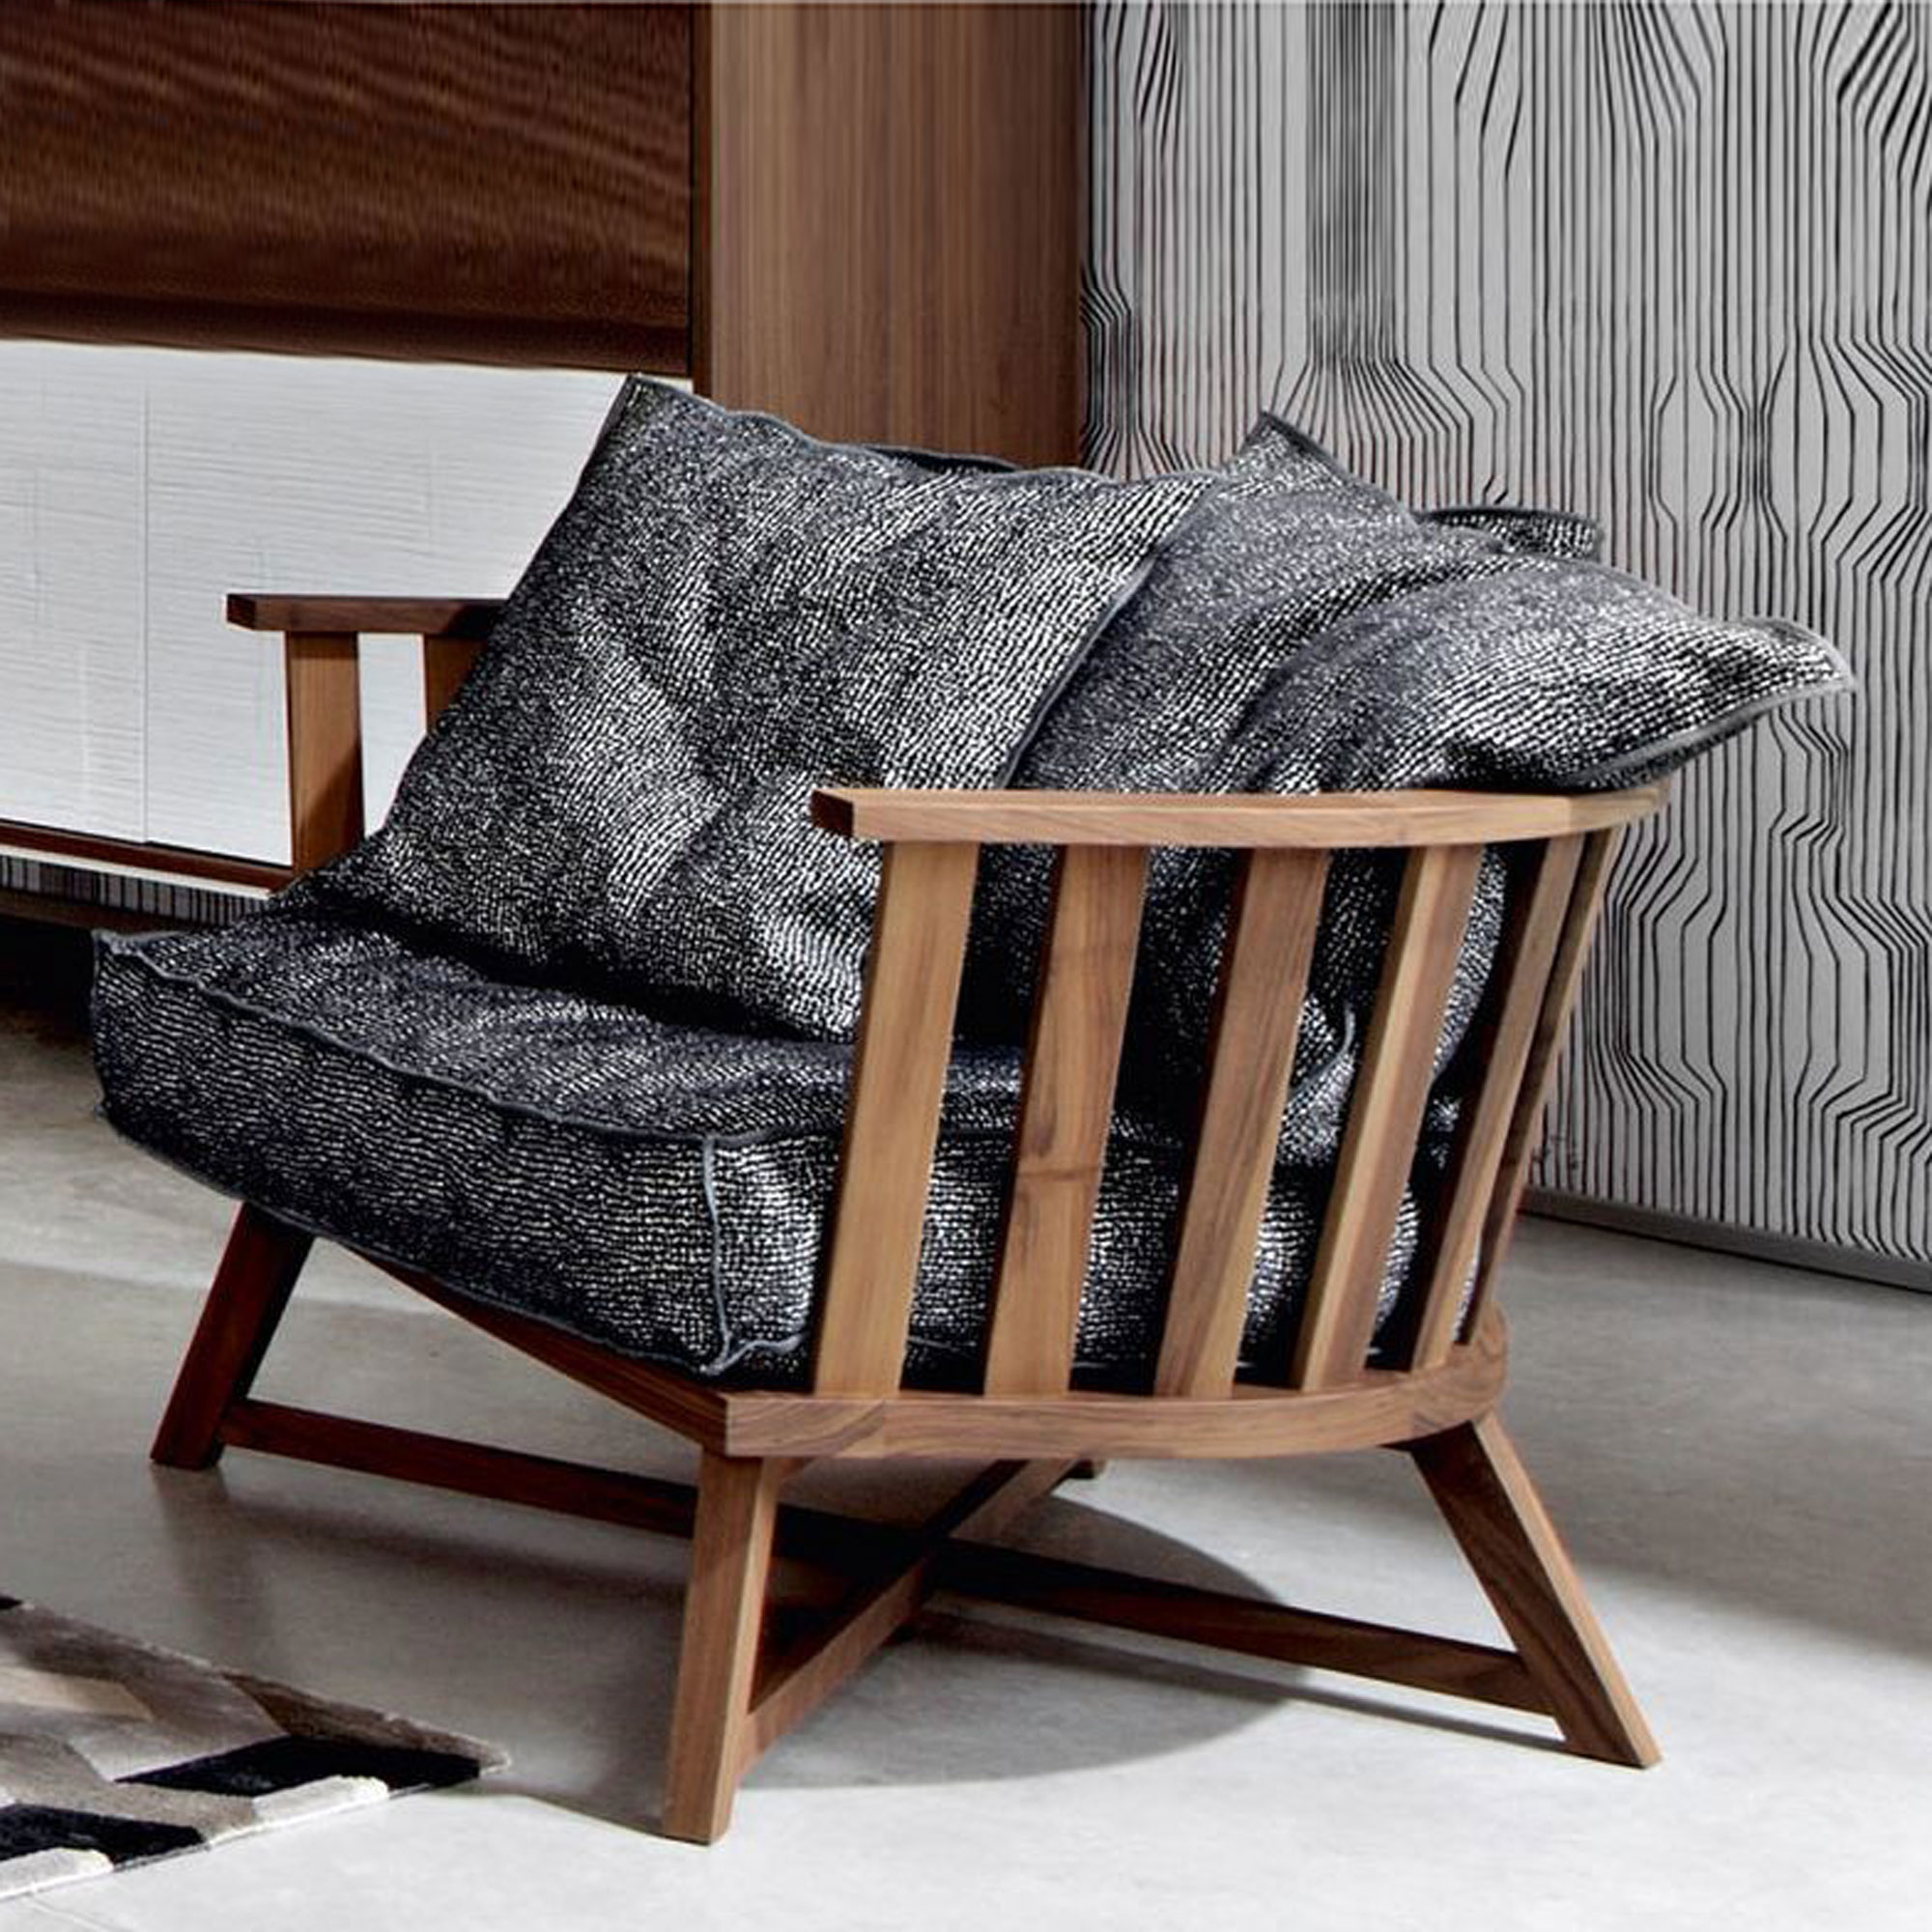 GRAY 07 LOUNGE CHAIR by Gervasoni | South Hill Home